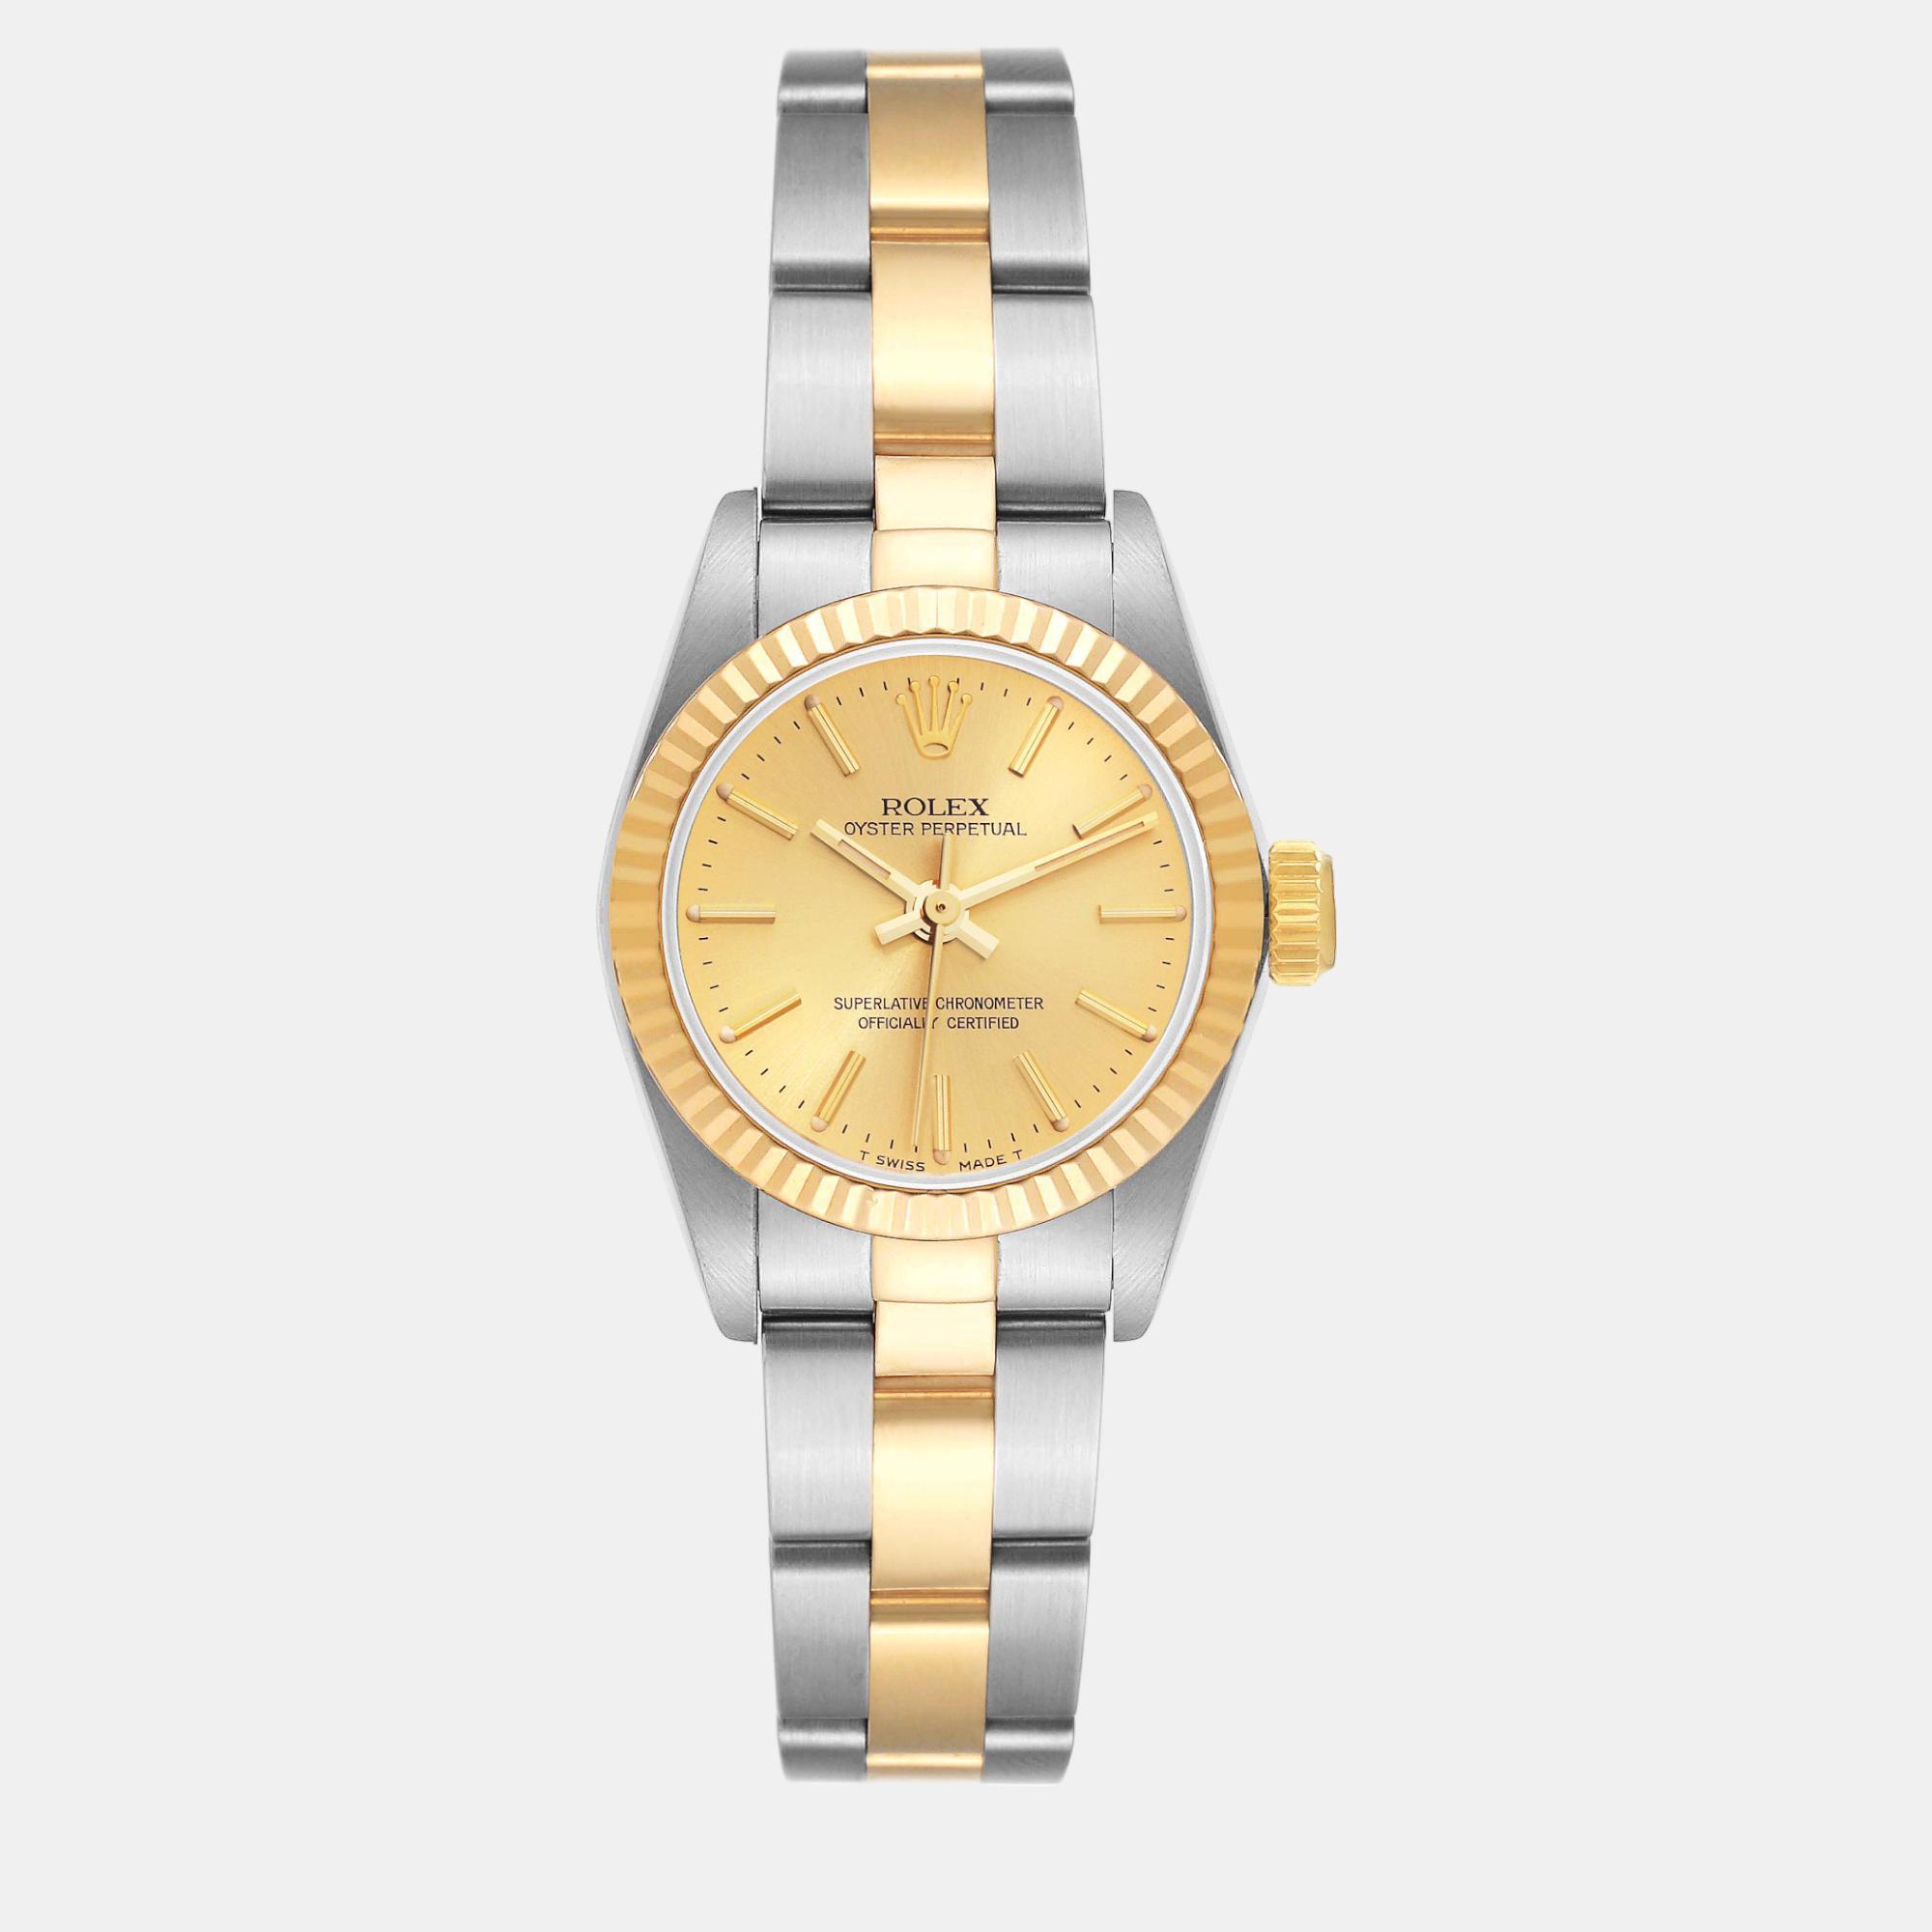 Rolex oyster perpetual steel yellow gold ladies watch 24 mm